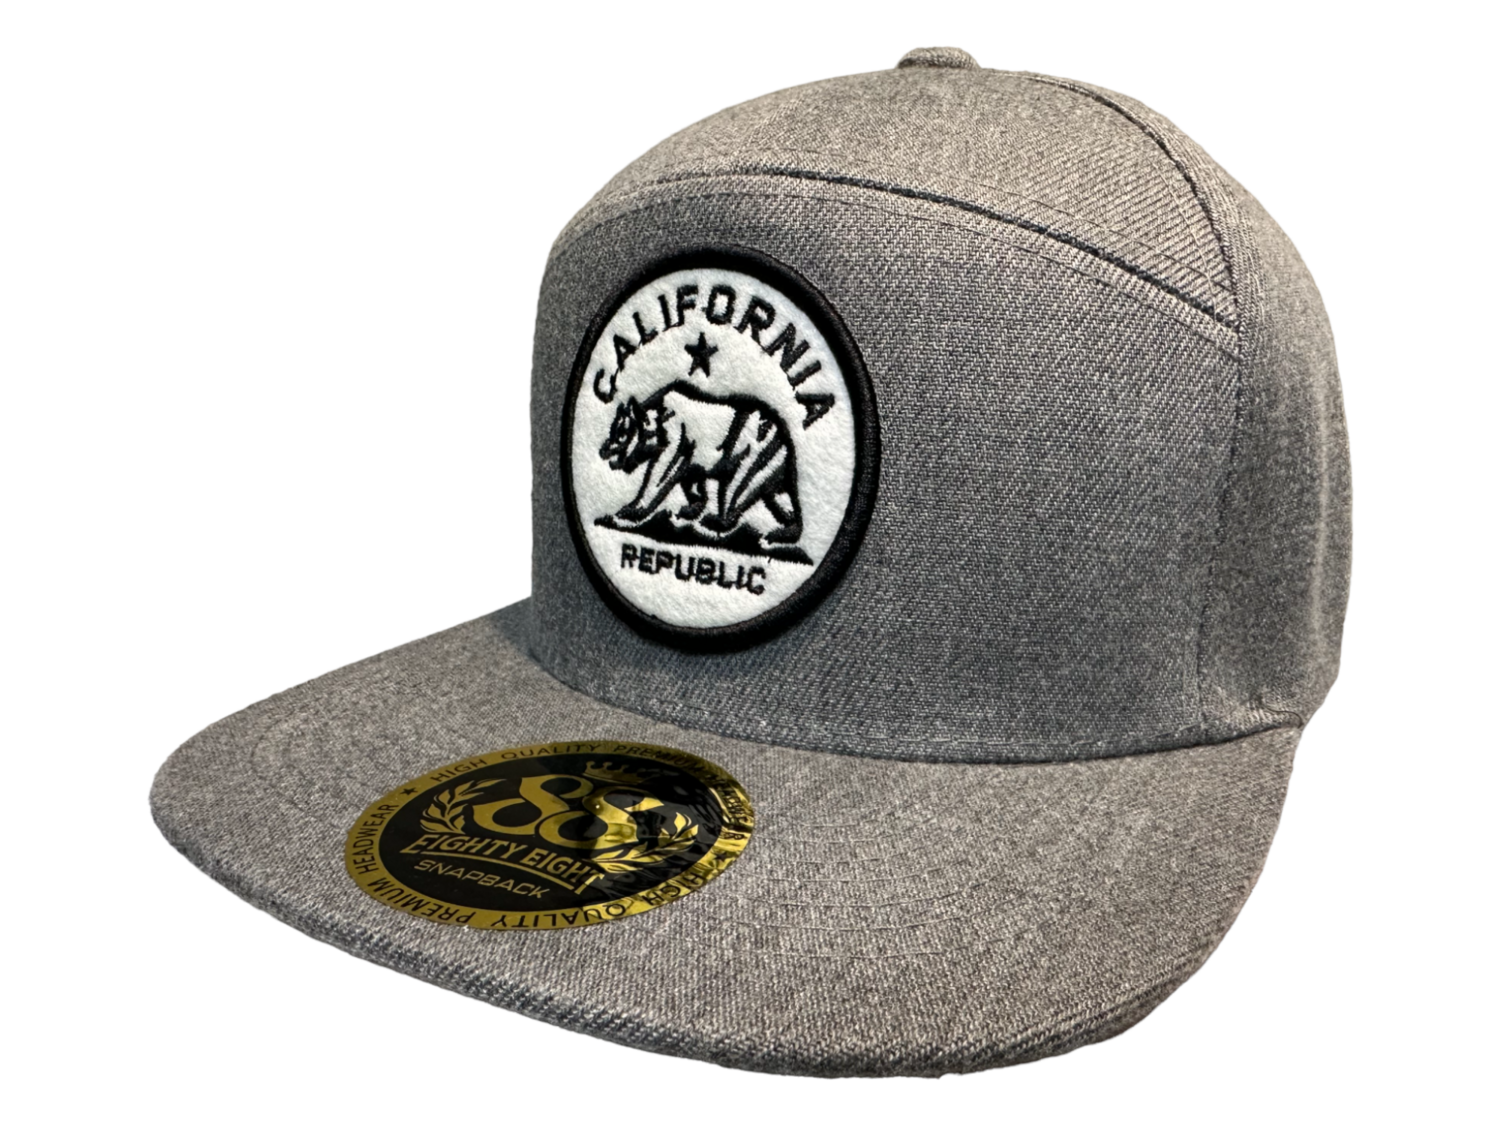 California Republic Black on White Patch Snapback 6 Panel Adjustable Snap Fit Hat